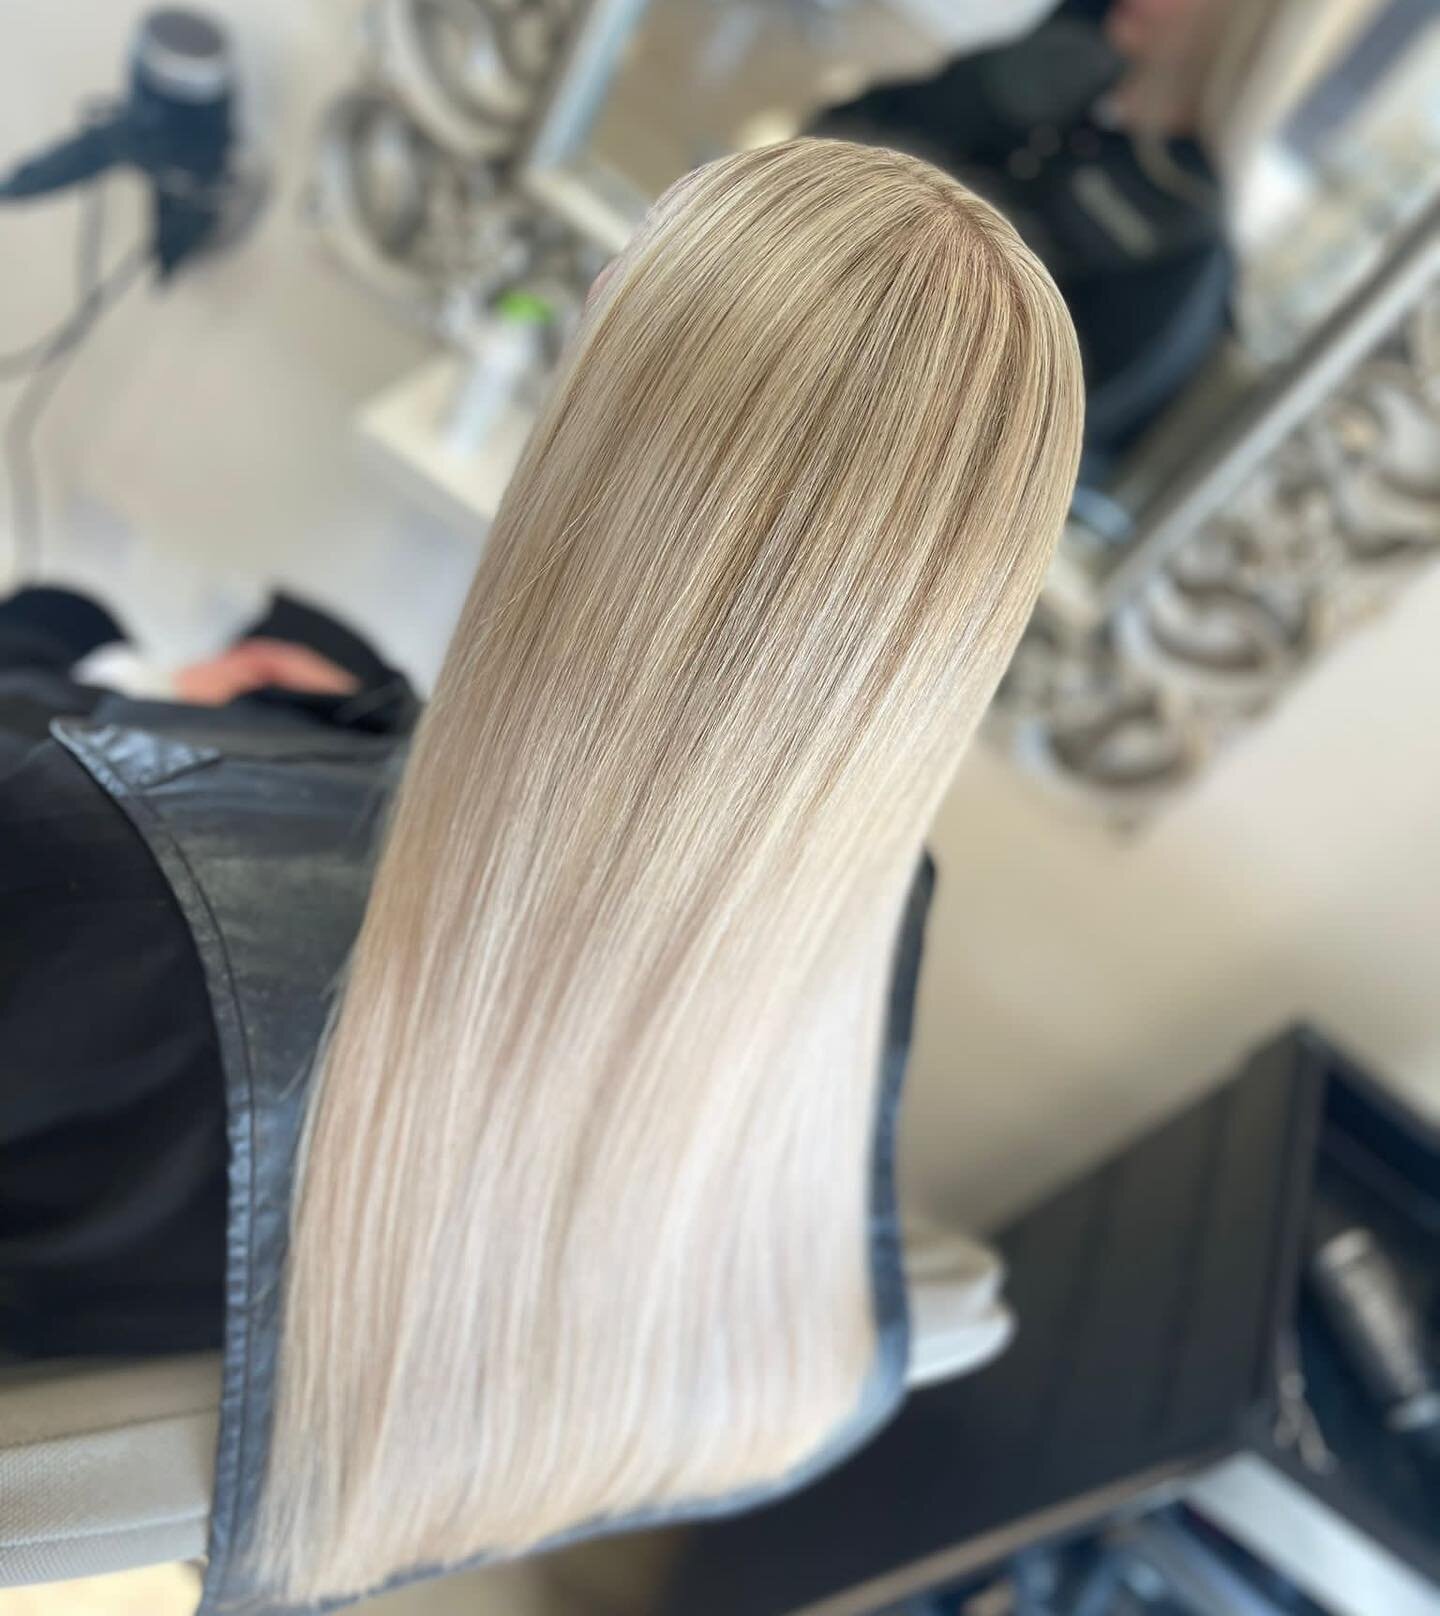 The most stunning highlight creation by our fabulous stylist Kasey, see the before and after for this blonde transformation.

Products used : @paulmitchell&nbsp;@paulmitchelluk @xgcolour #olaplex
⏰ &nbsp;Please be aware that any new colour clients re